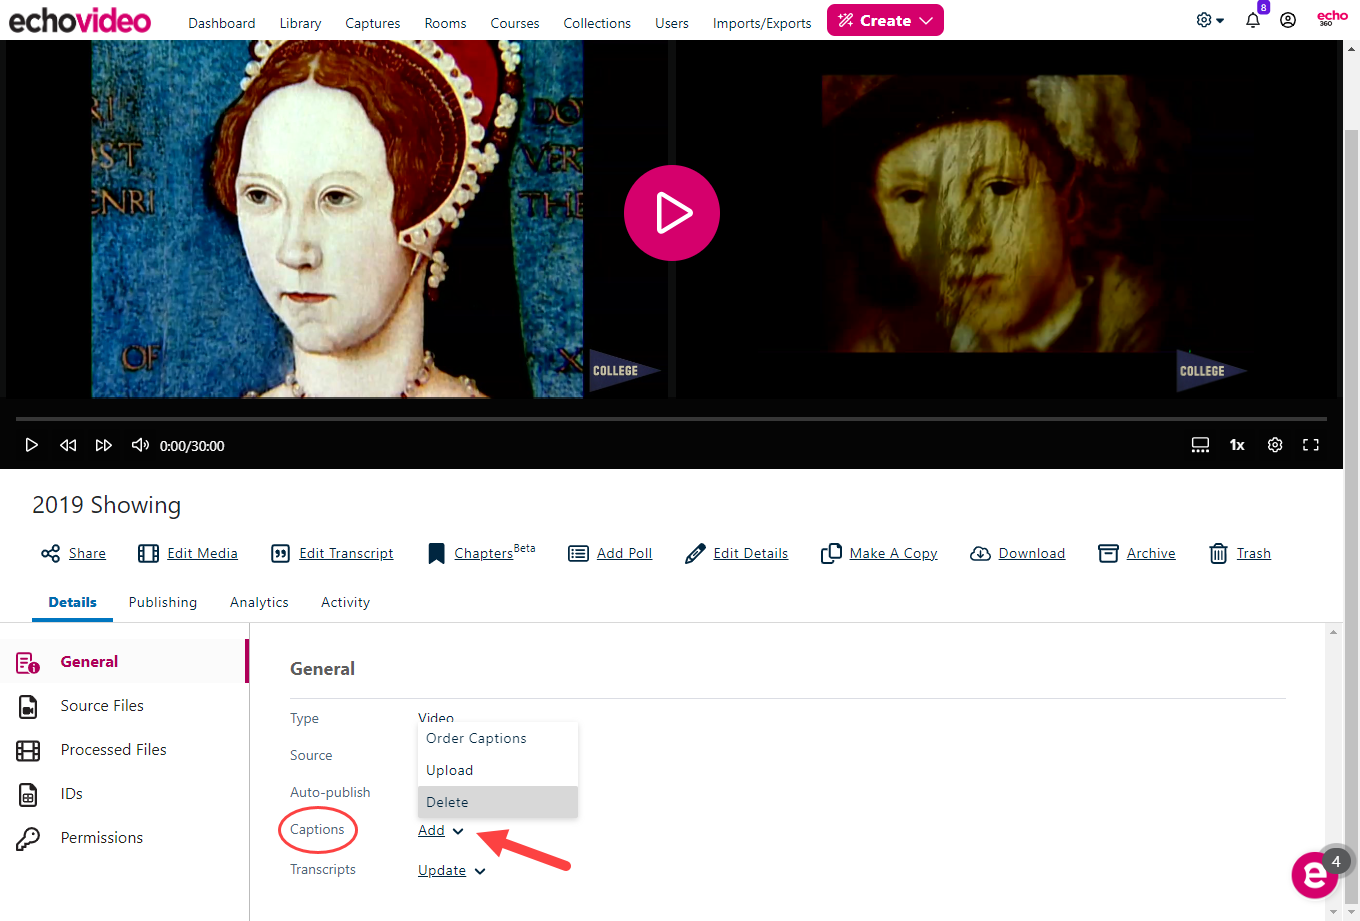 Media details page for completed capture with Add captions options identified as described